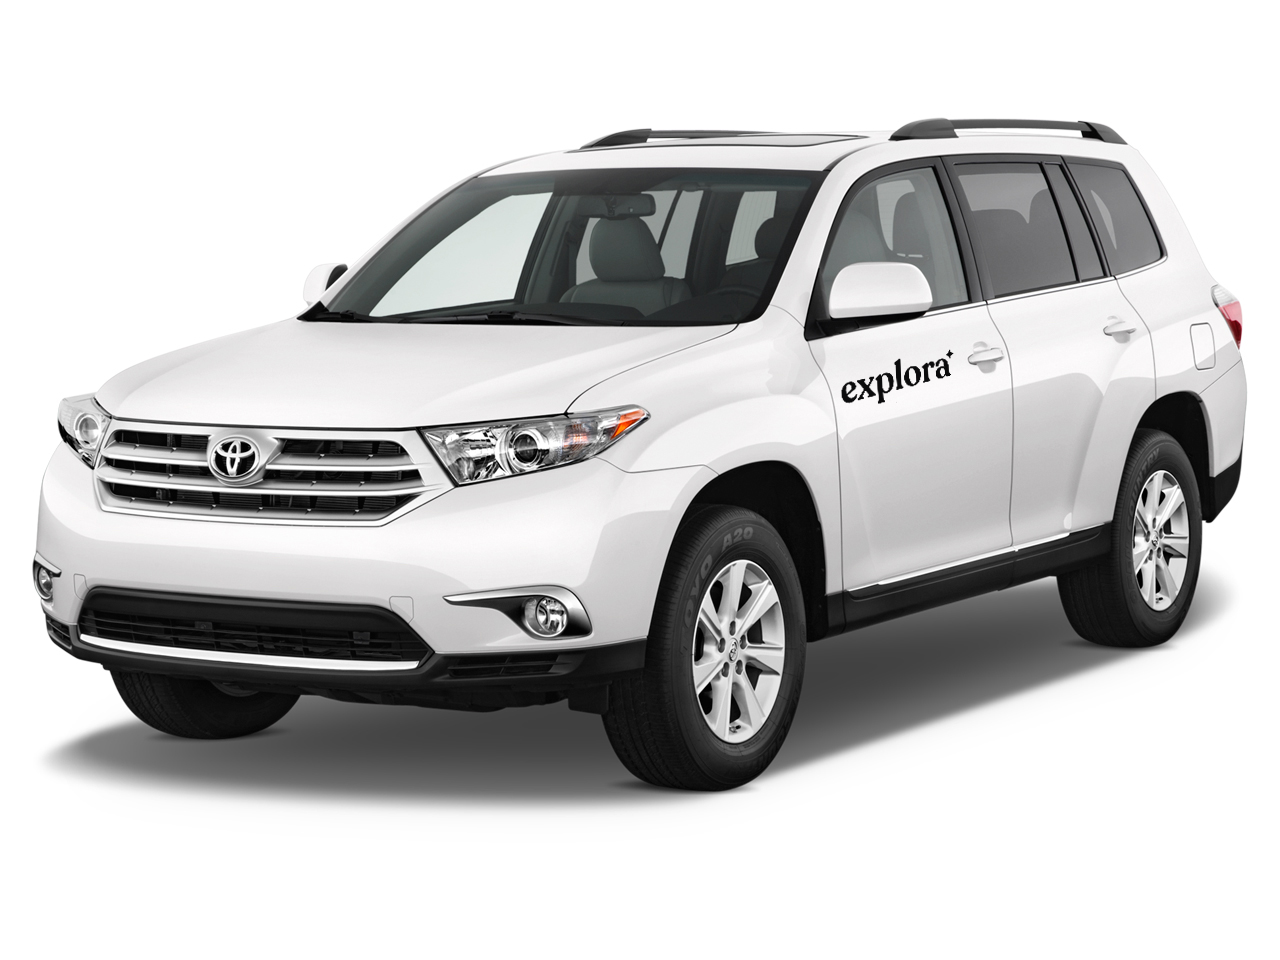 Rent a Toyota Kluger 2011 Car with Camping Gear in Tasmania